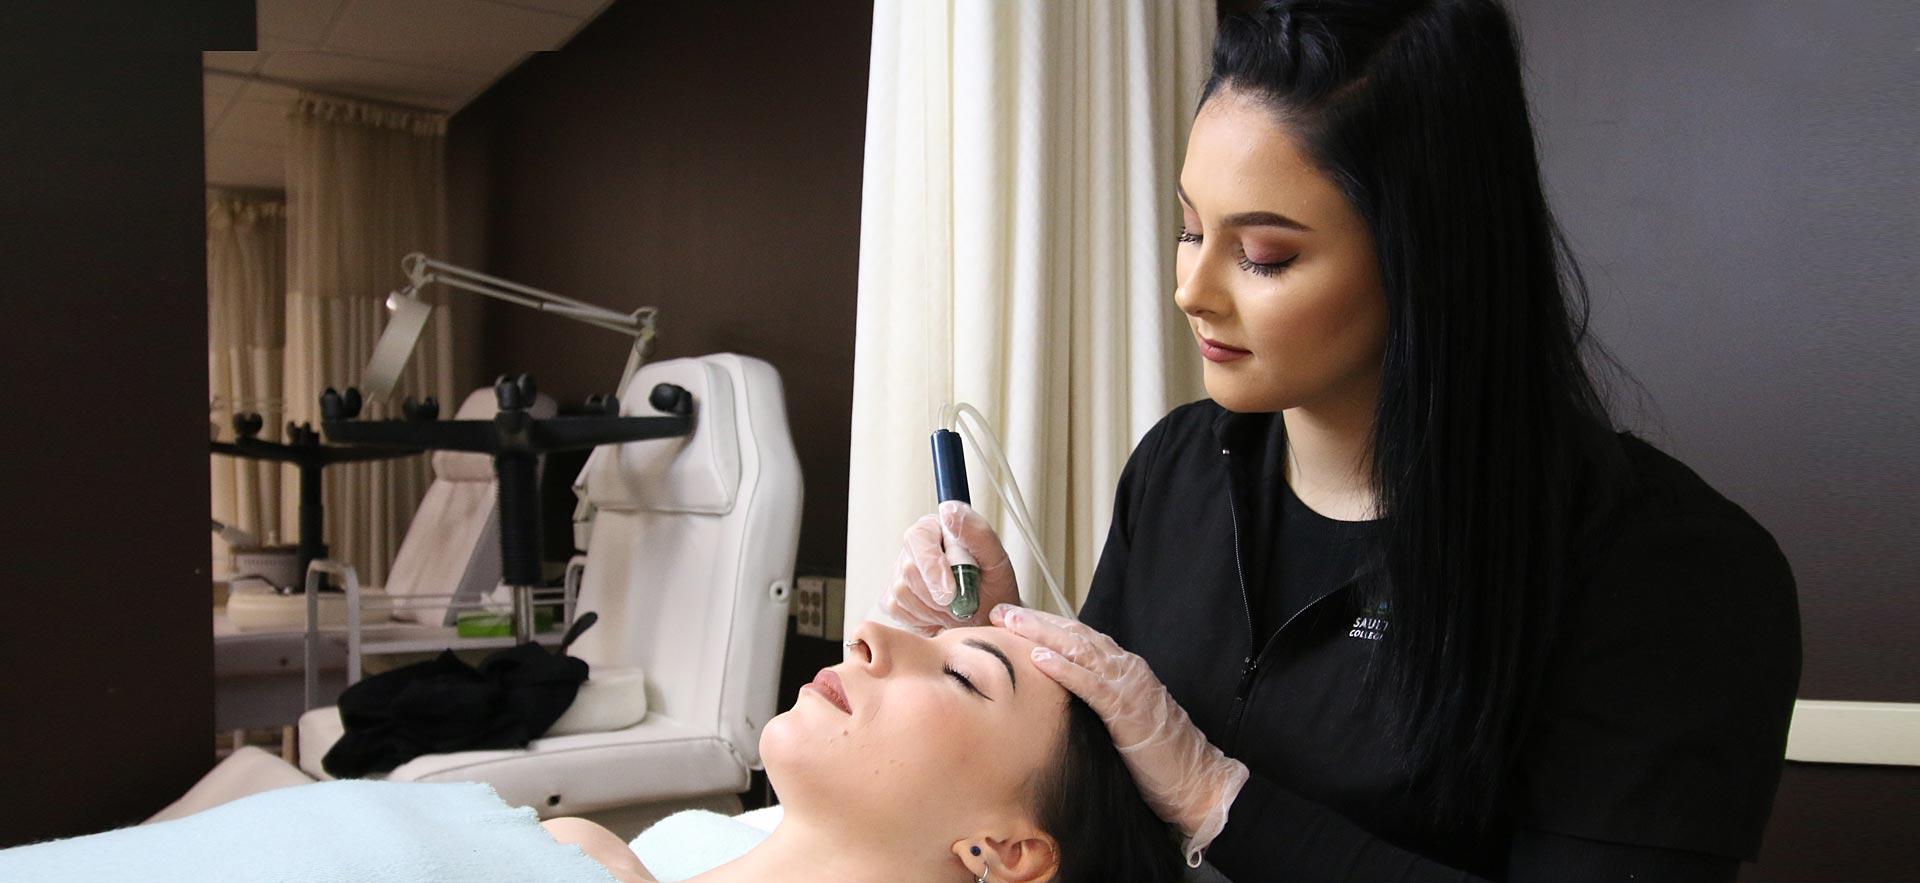 One female Esthetician student applies a skin treatment to another student in the о salon spa.